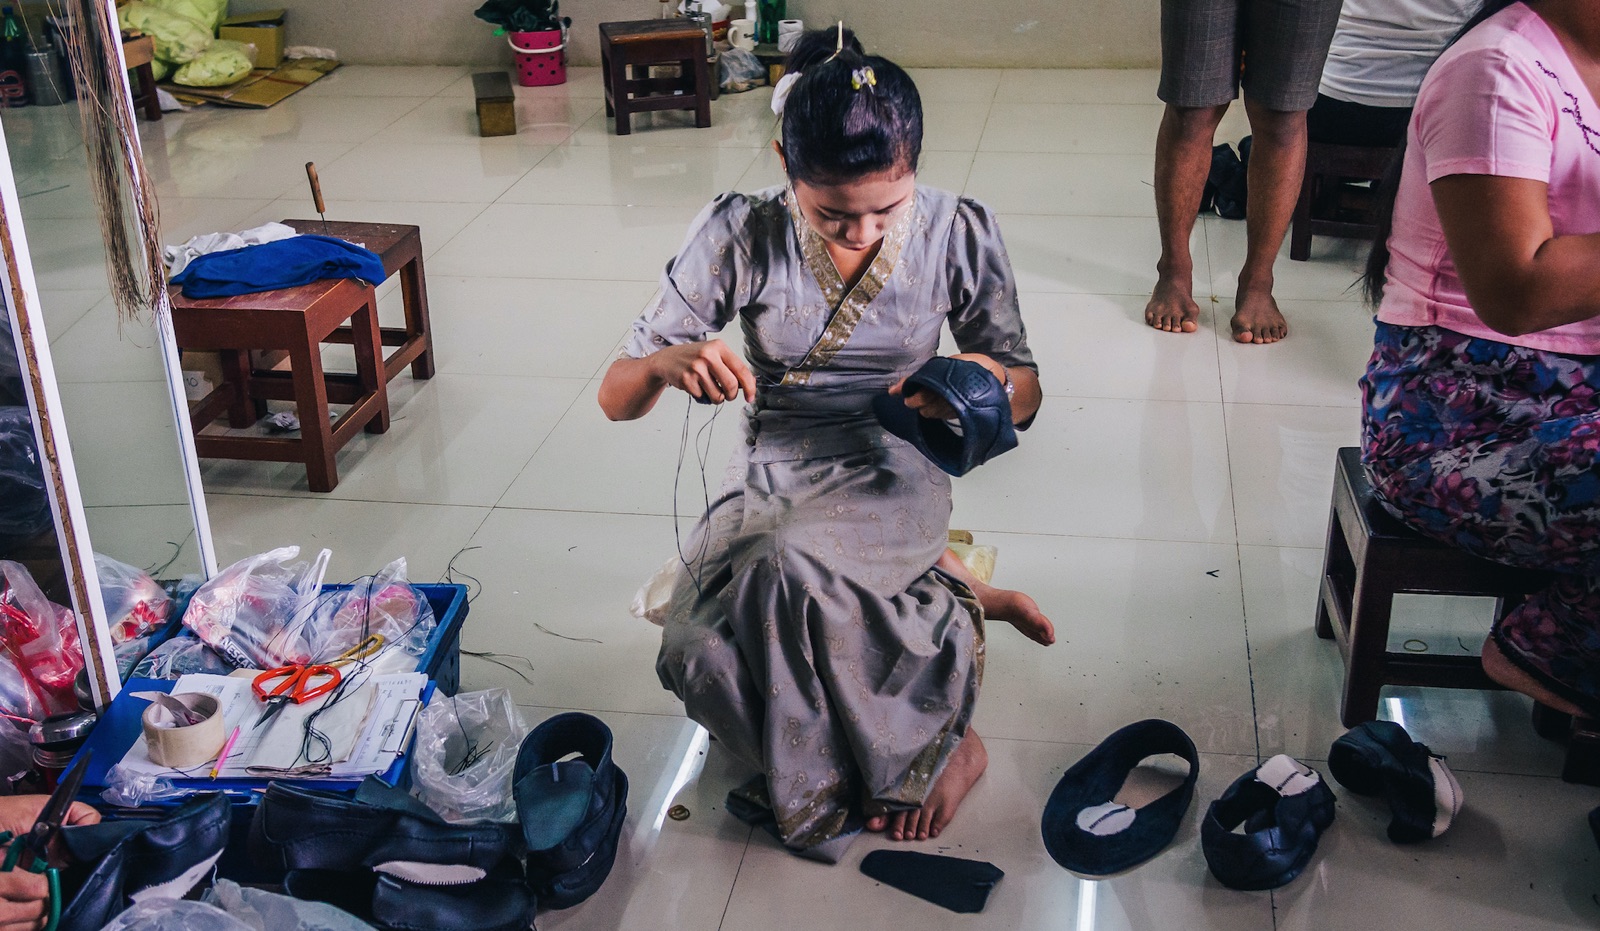 Burmese female migrant workers sewing or stitching leather shoes in footwear production line of factory in Sankhlaburi, Kanchanaburi, Thai-Burma border province.